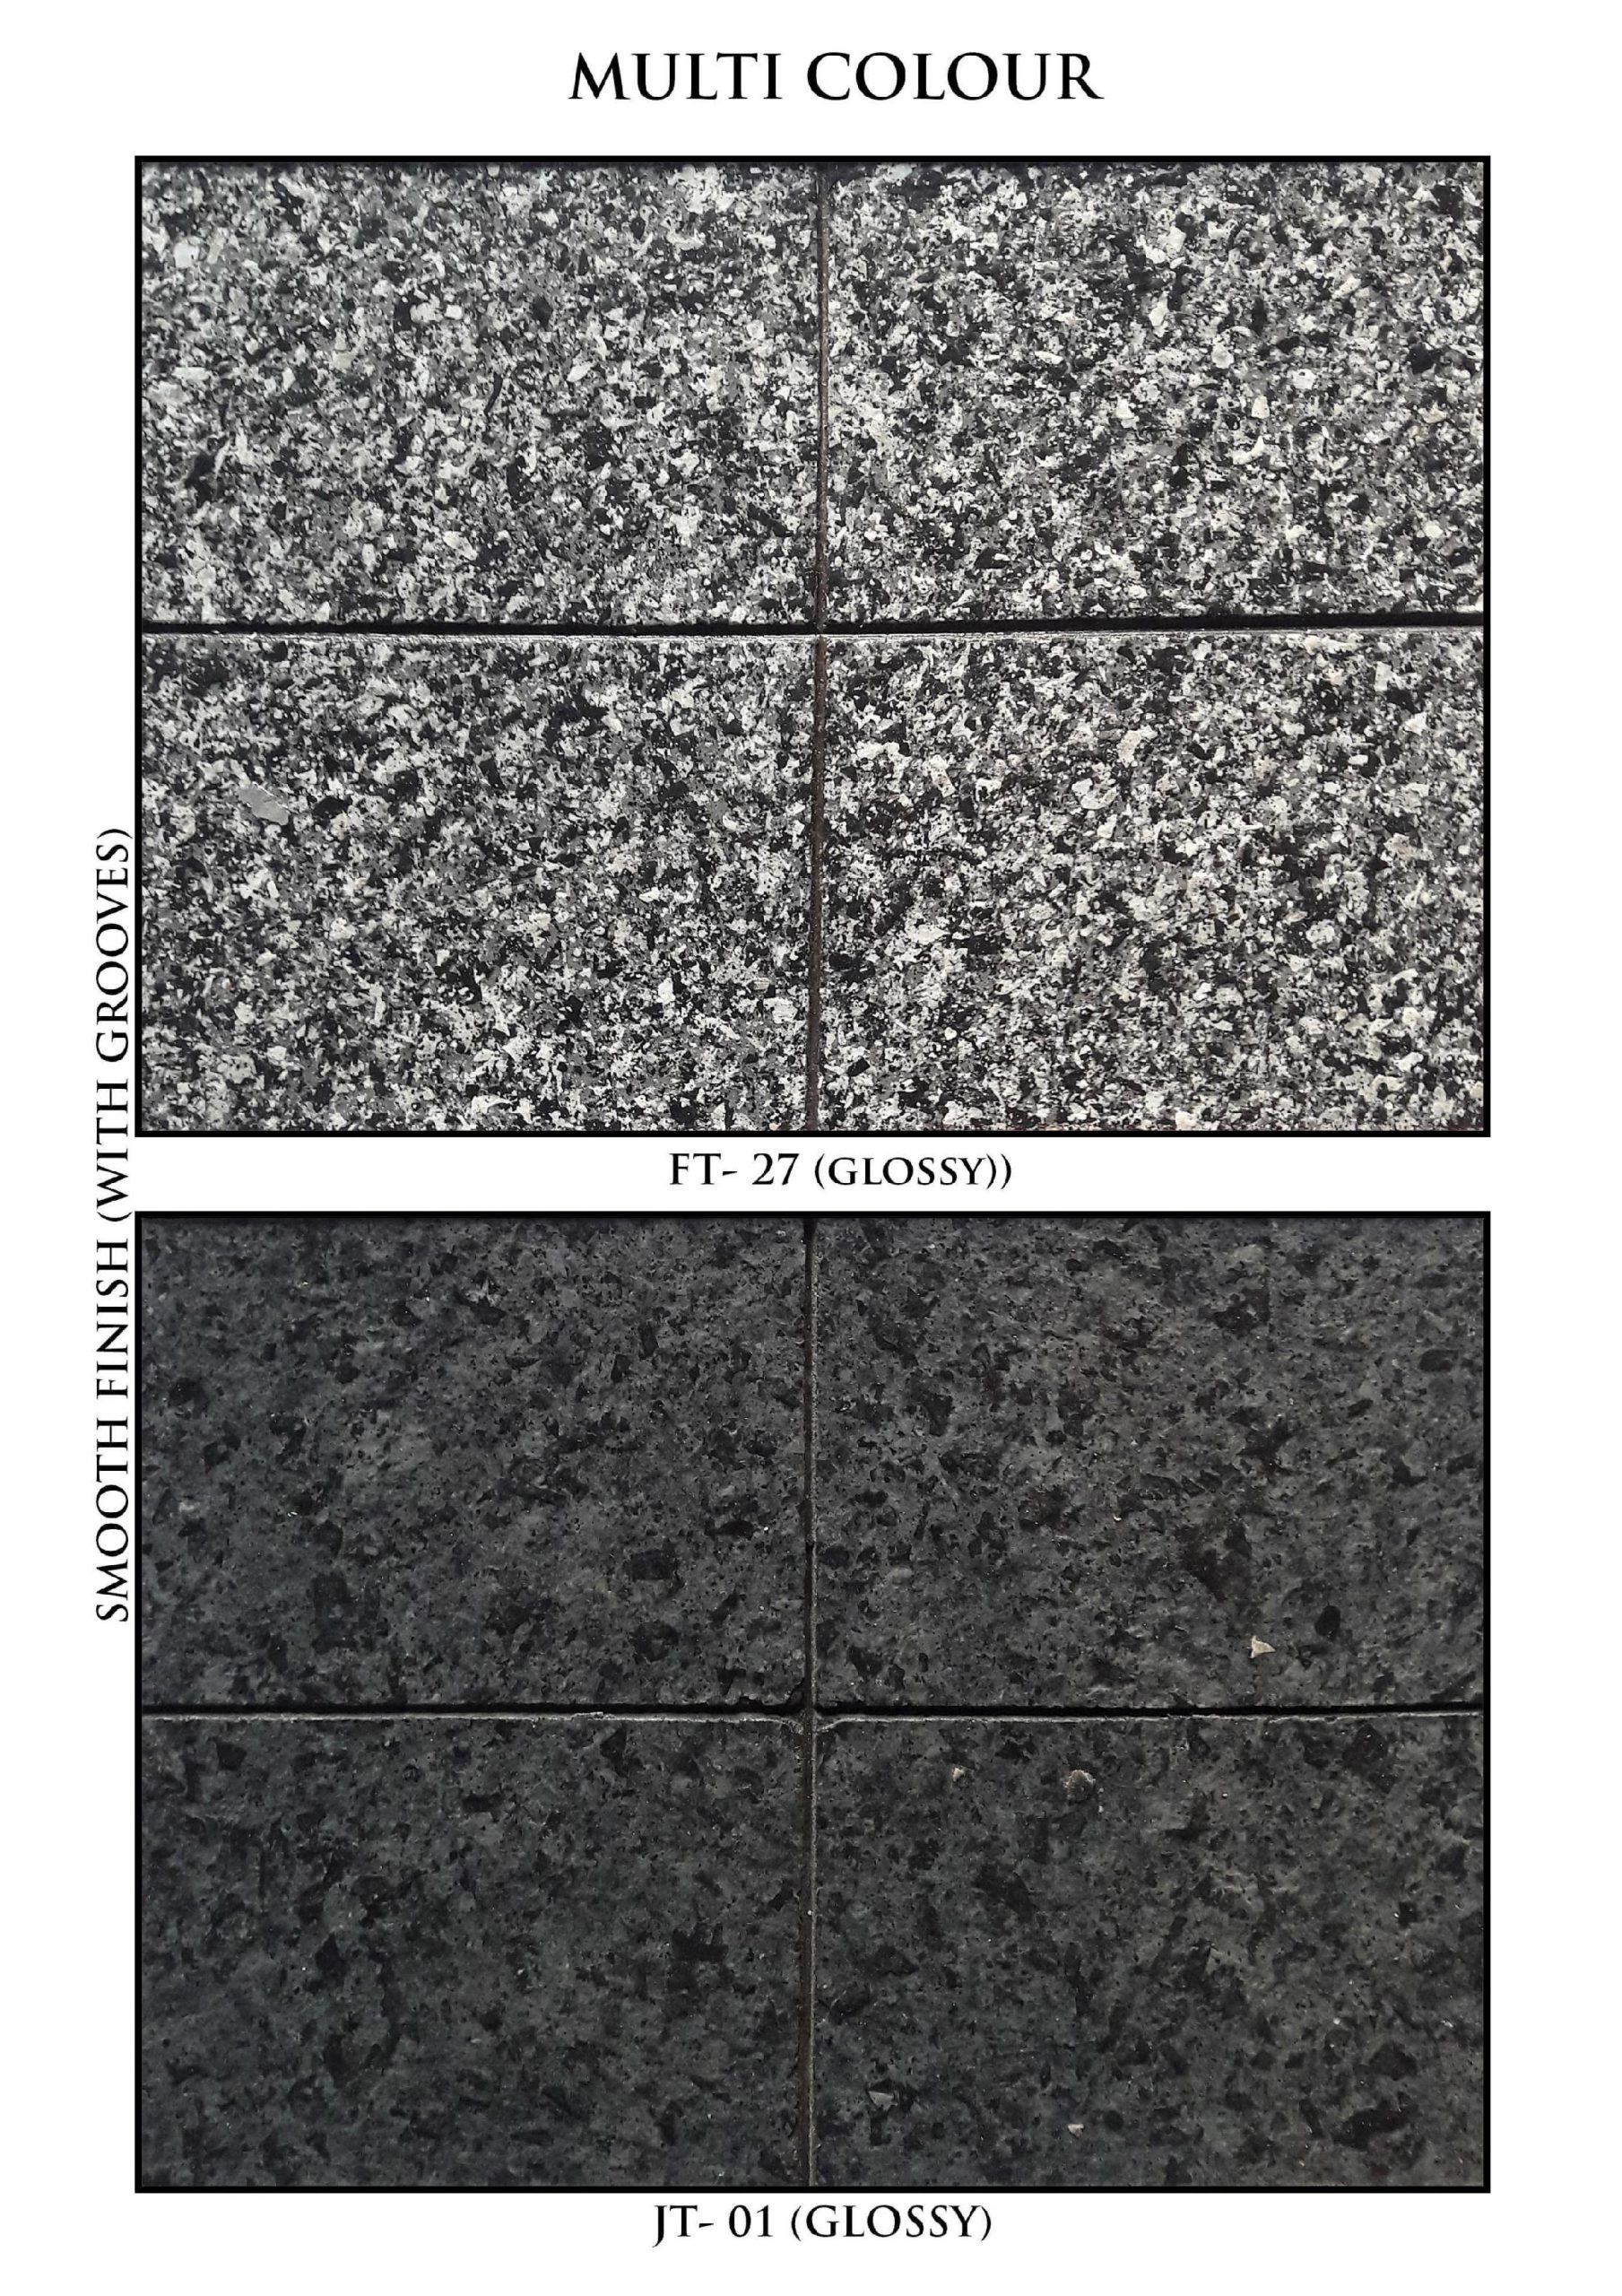 Multicolor Granite Shadecard 3 scaled 1